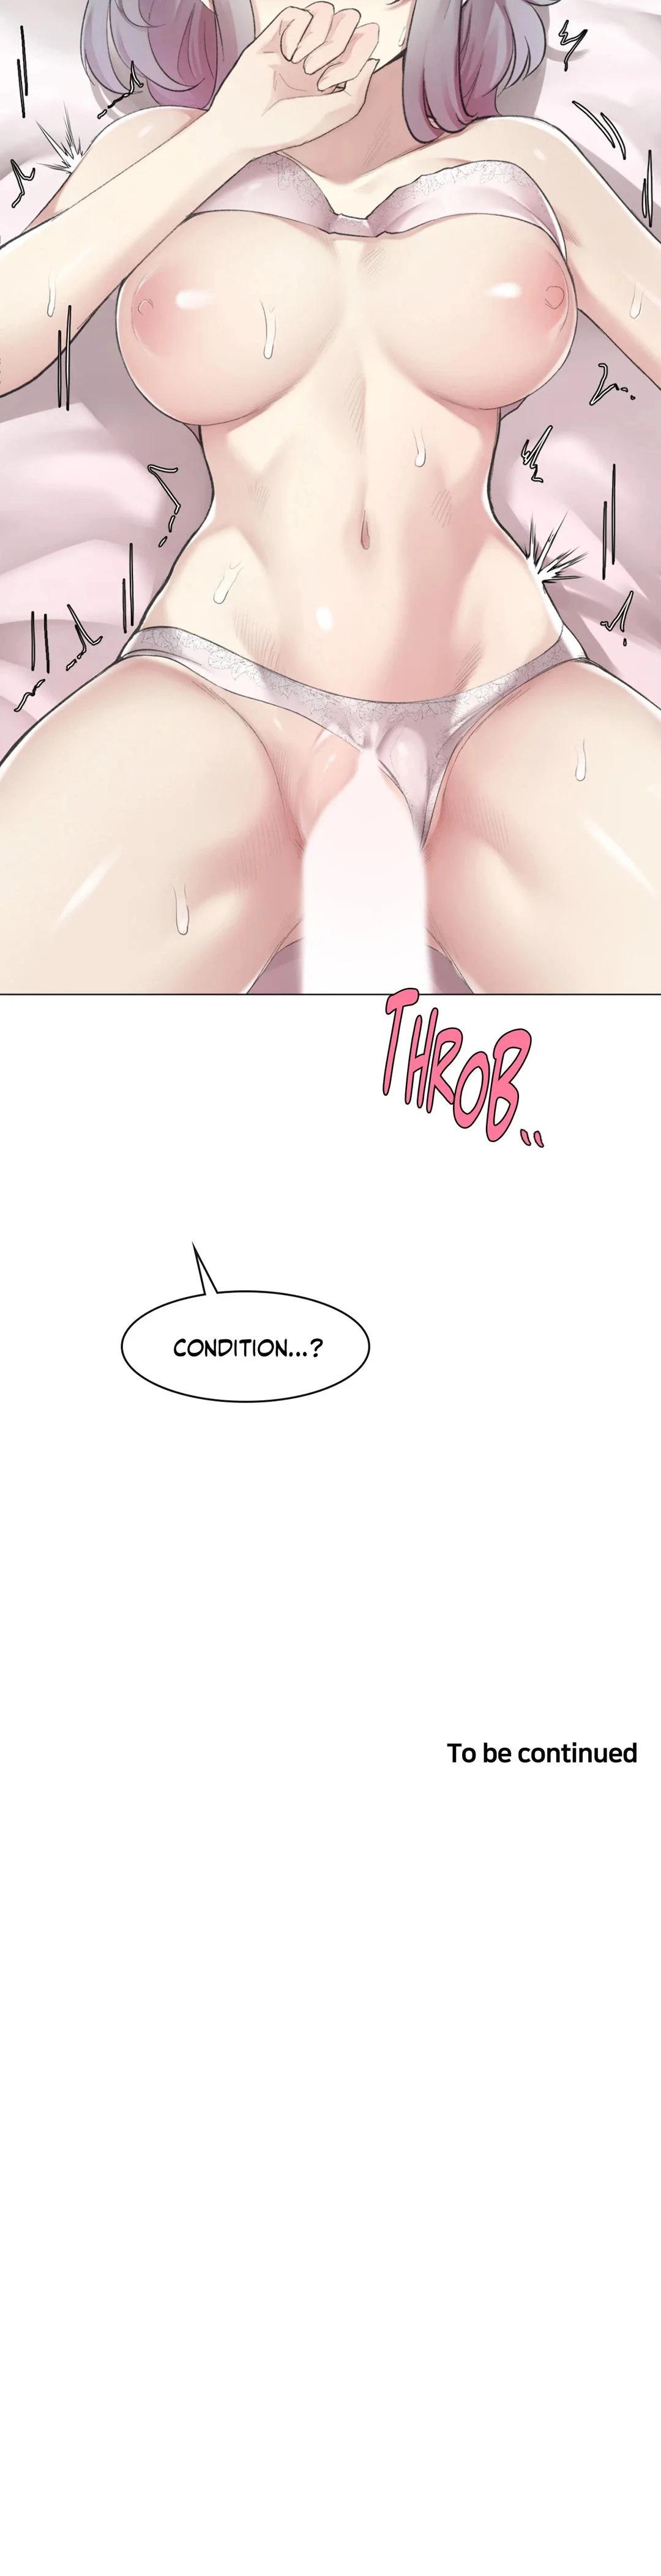 [Dumangoon, KONG_] Sexcape Room: Snap Off Ch.7/7 [English] [Manhwa PDF] Completed 103